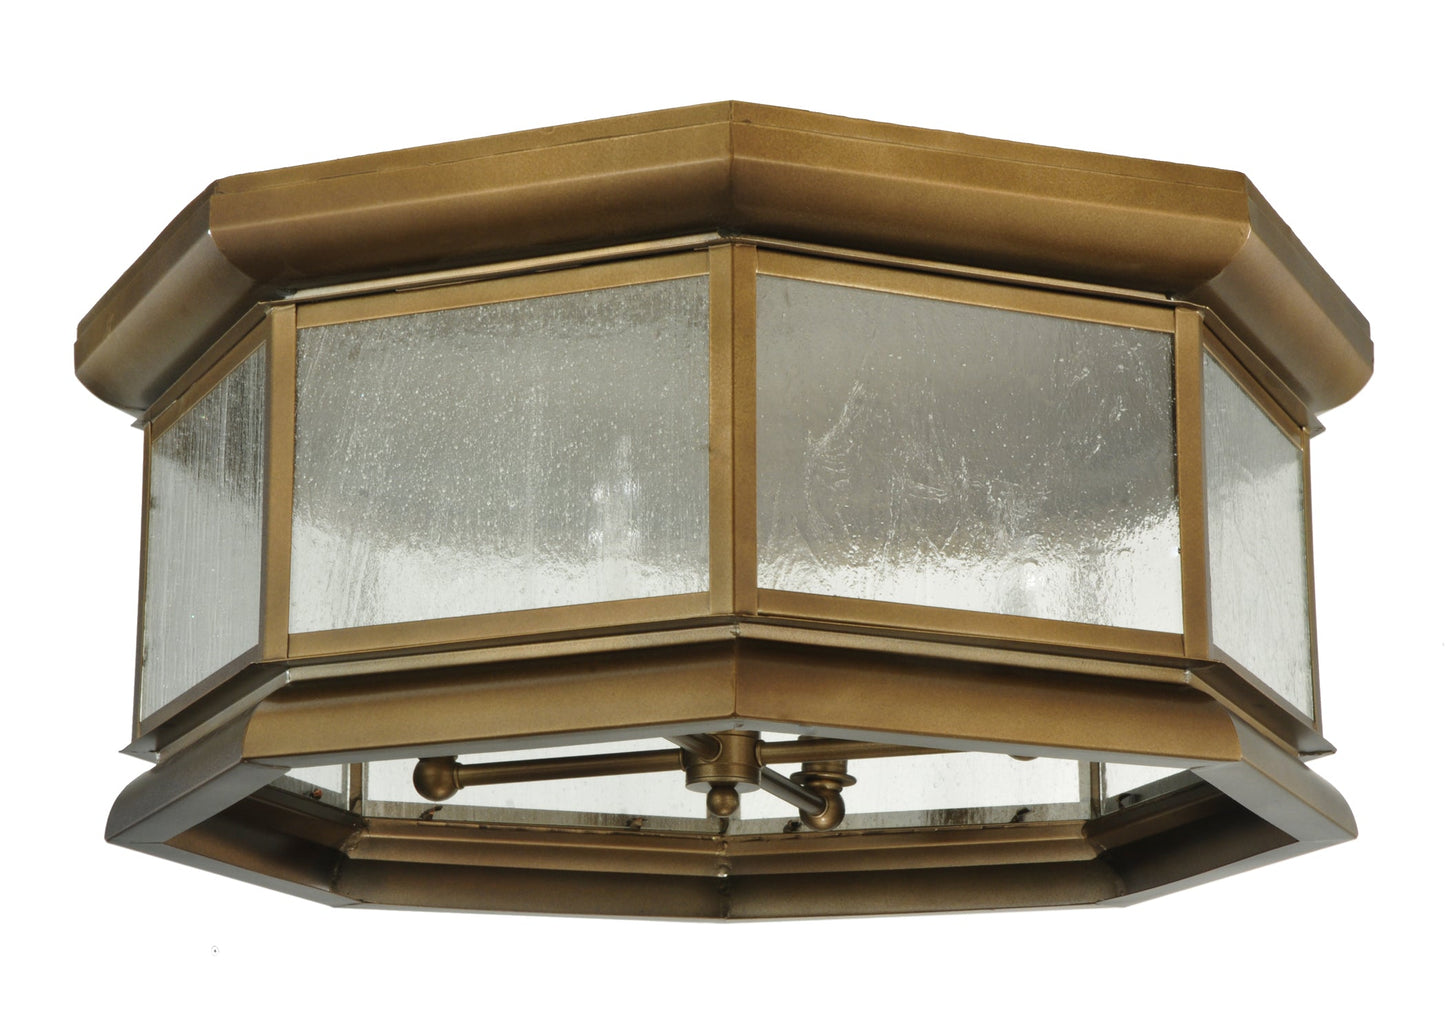 30" Manchester Flushmount by 2nd Ave Lighting